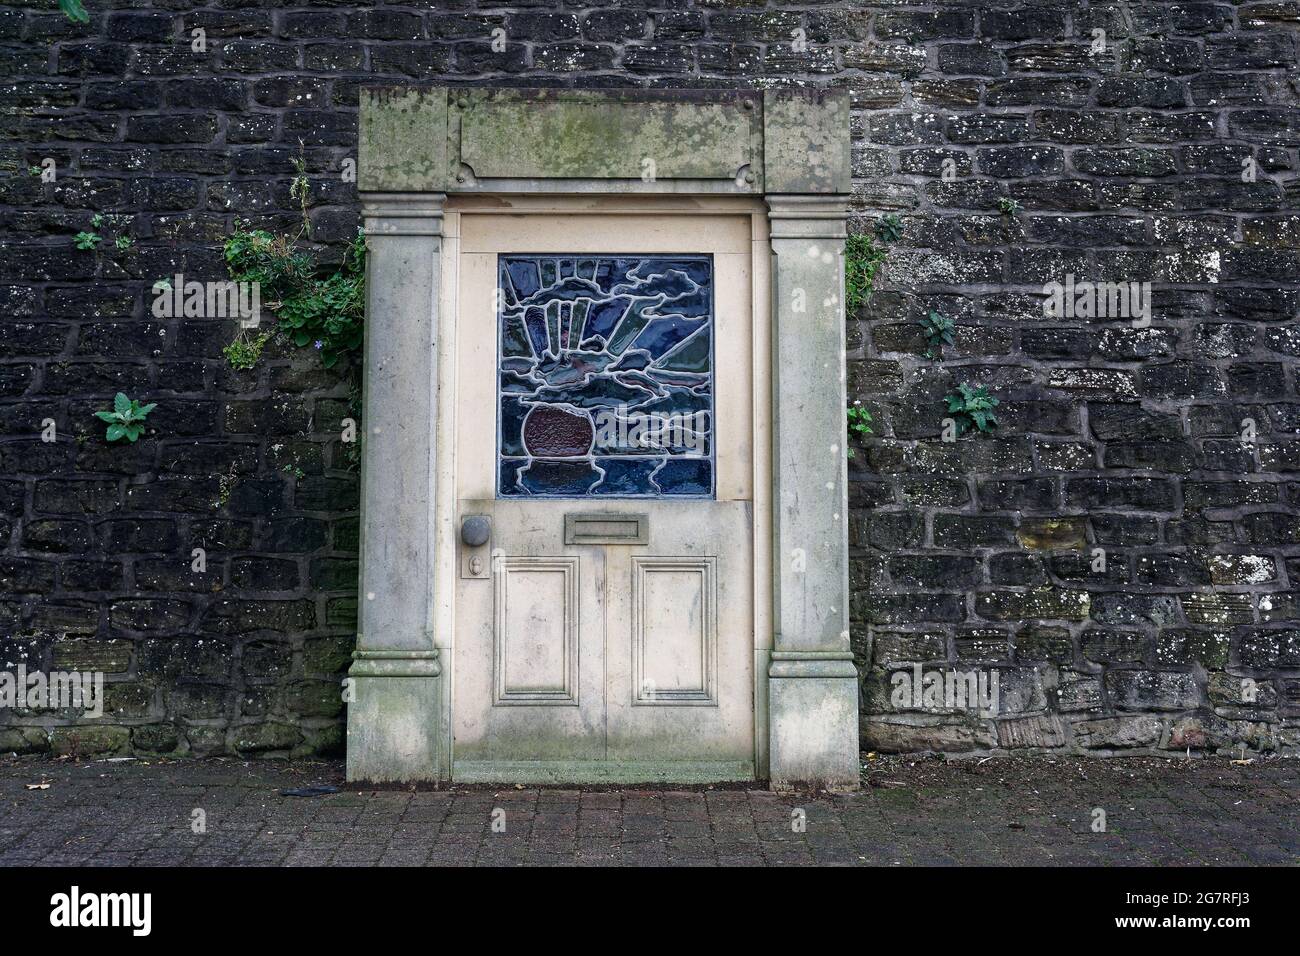 A door in a wall, what secrets lie beyond? Enter at your peril. Stock Photo